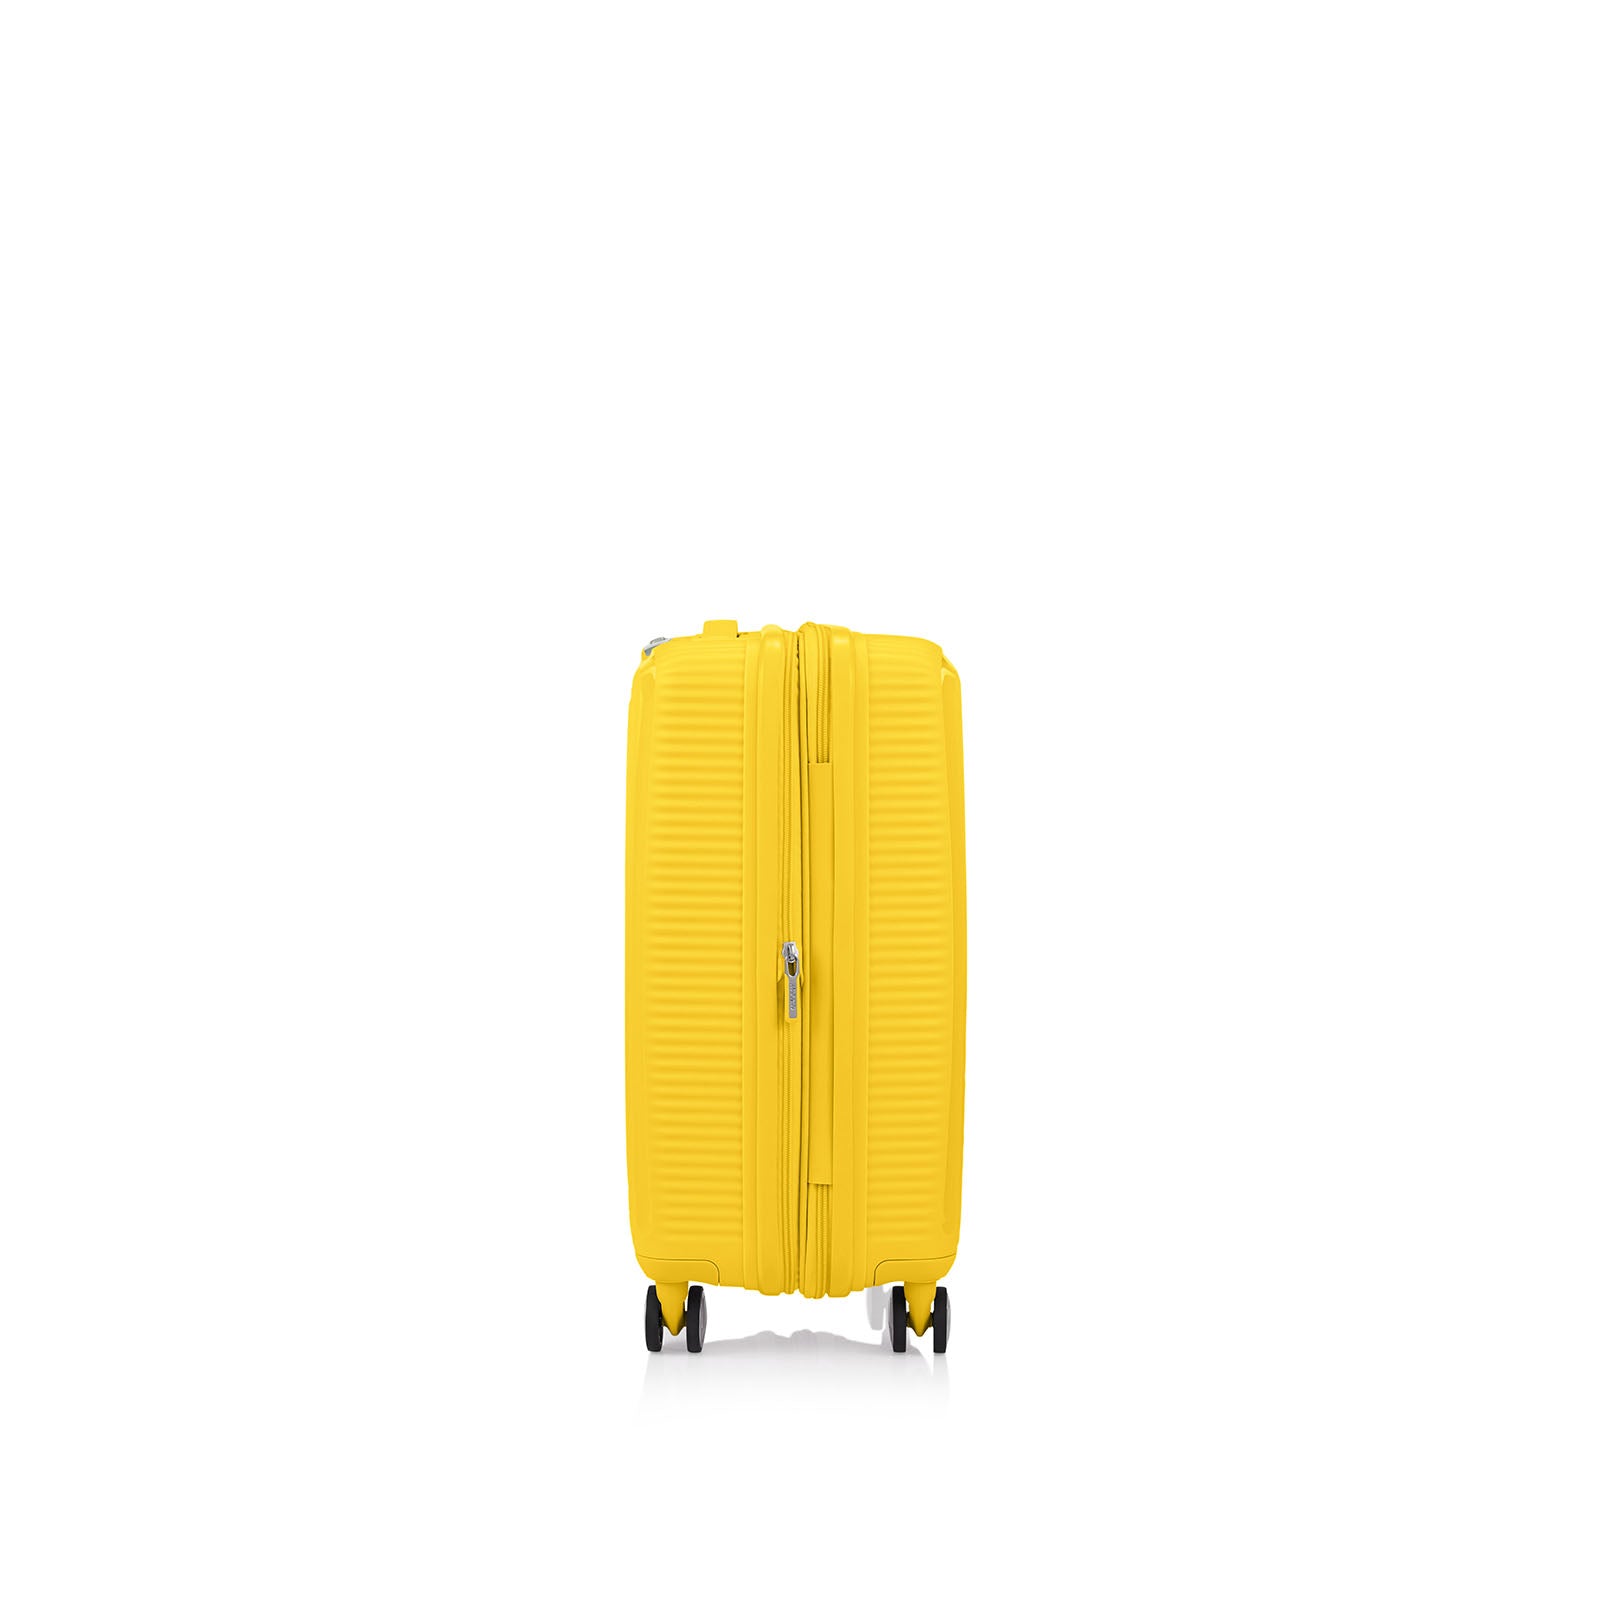 American-Tourister-Curio-2-55cm-Carry-On-Suitcase-Golden-Yellow-Hinge